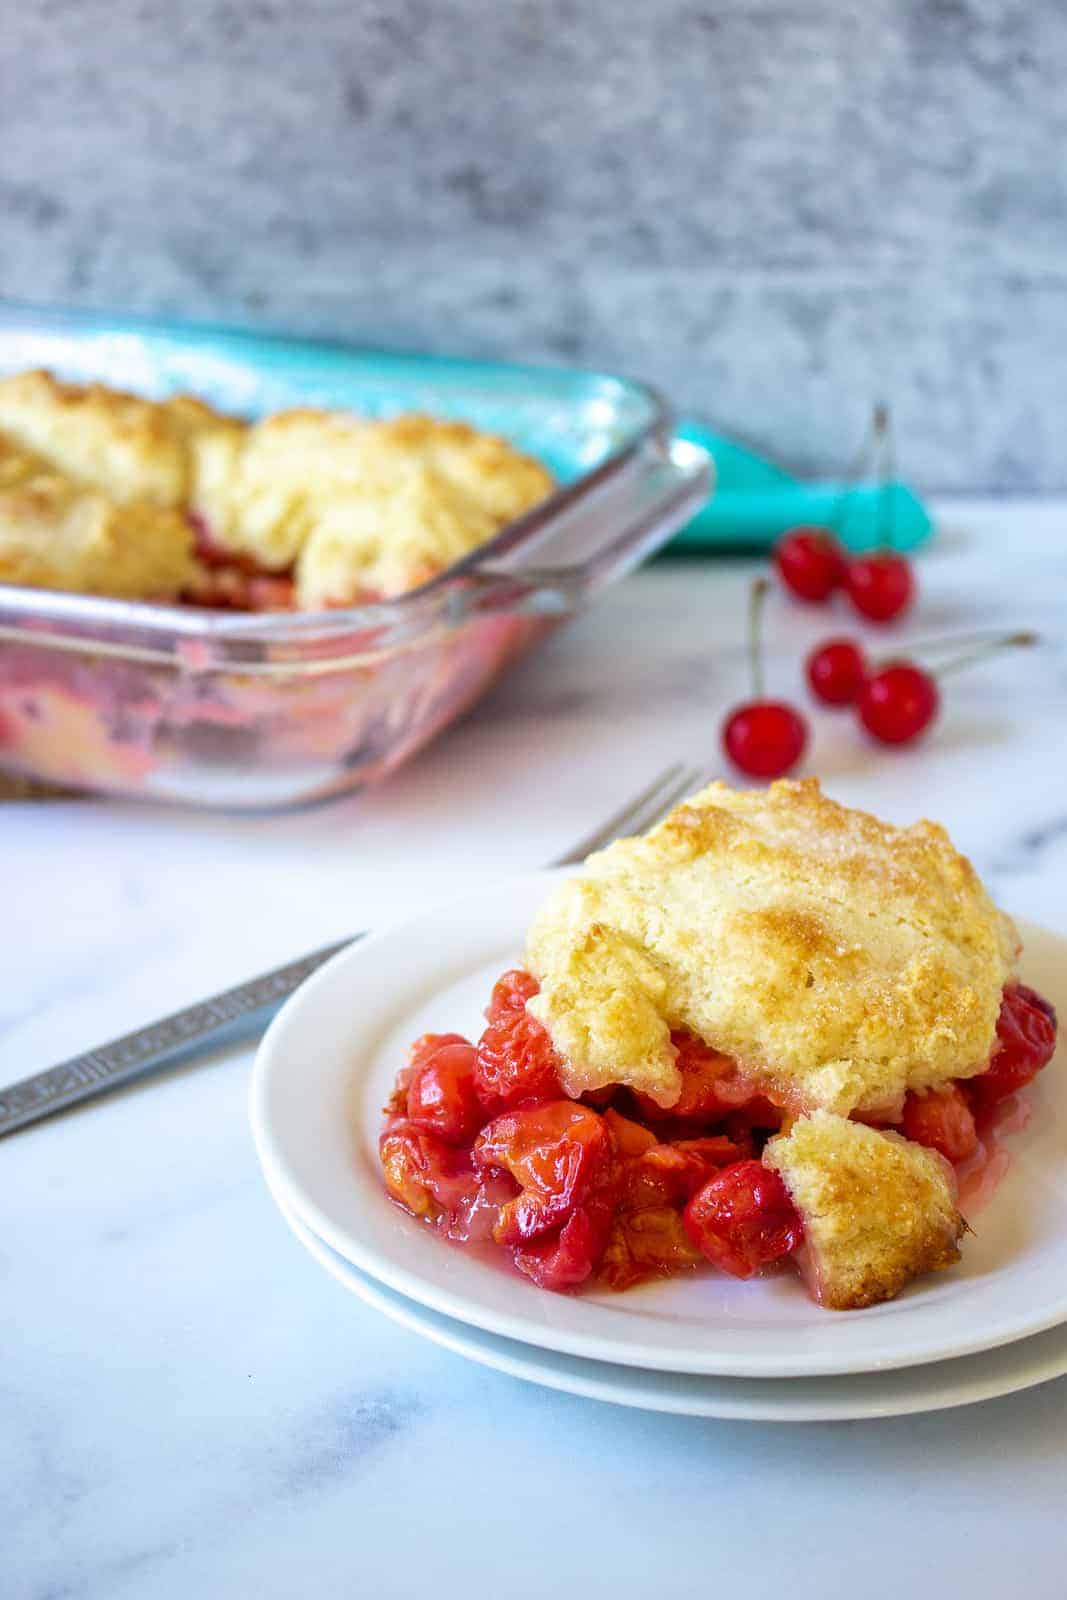 Cherry cobbler on a plate and in a casserole dish.